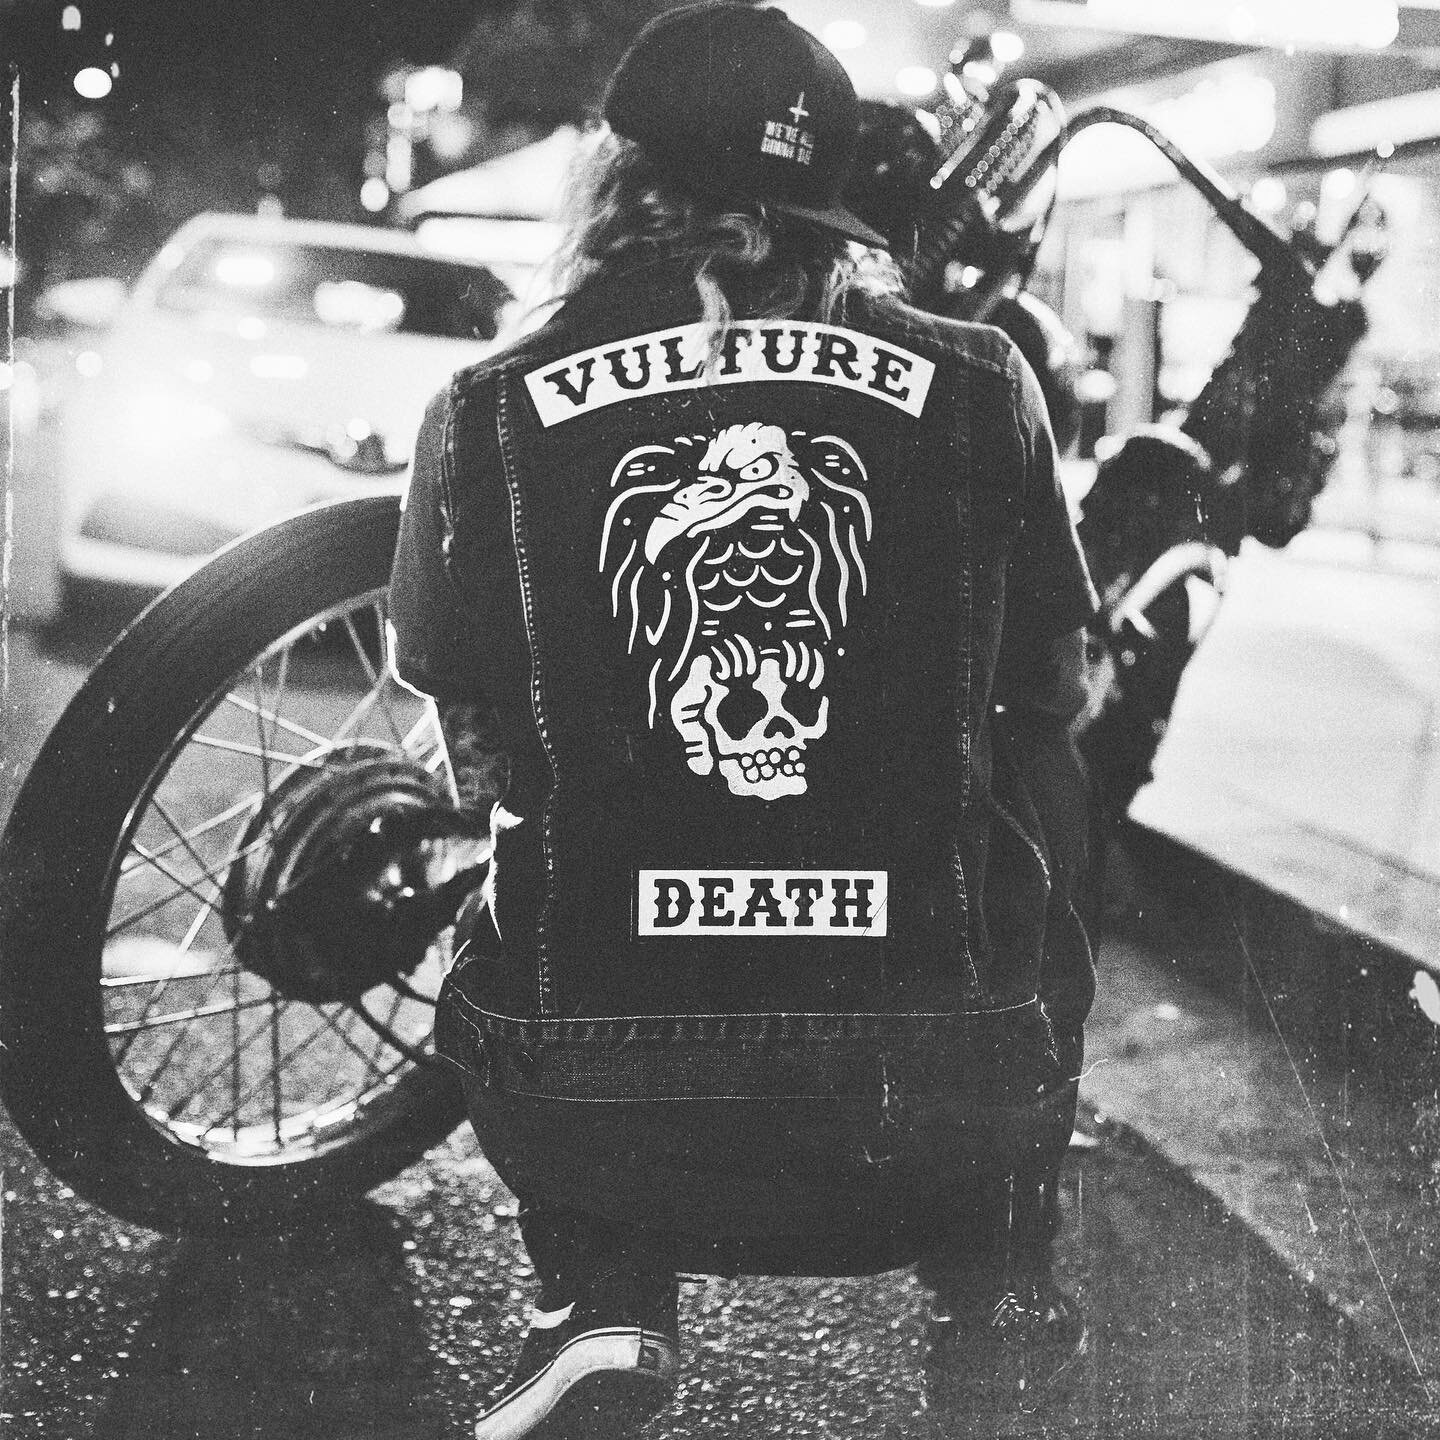 Handful of 10&rdquo; VULTURE backpatches left in stock. Put an end to your boring denim.
Photo by @patstevensonphoto 
#deathpatches #vulture #denim